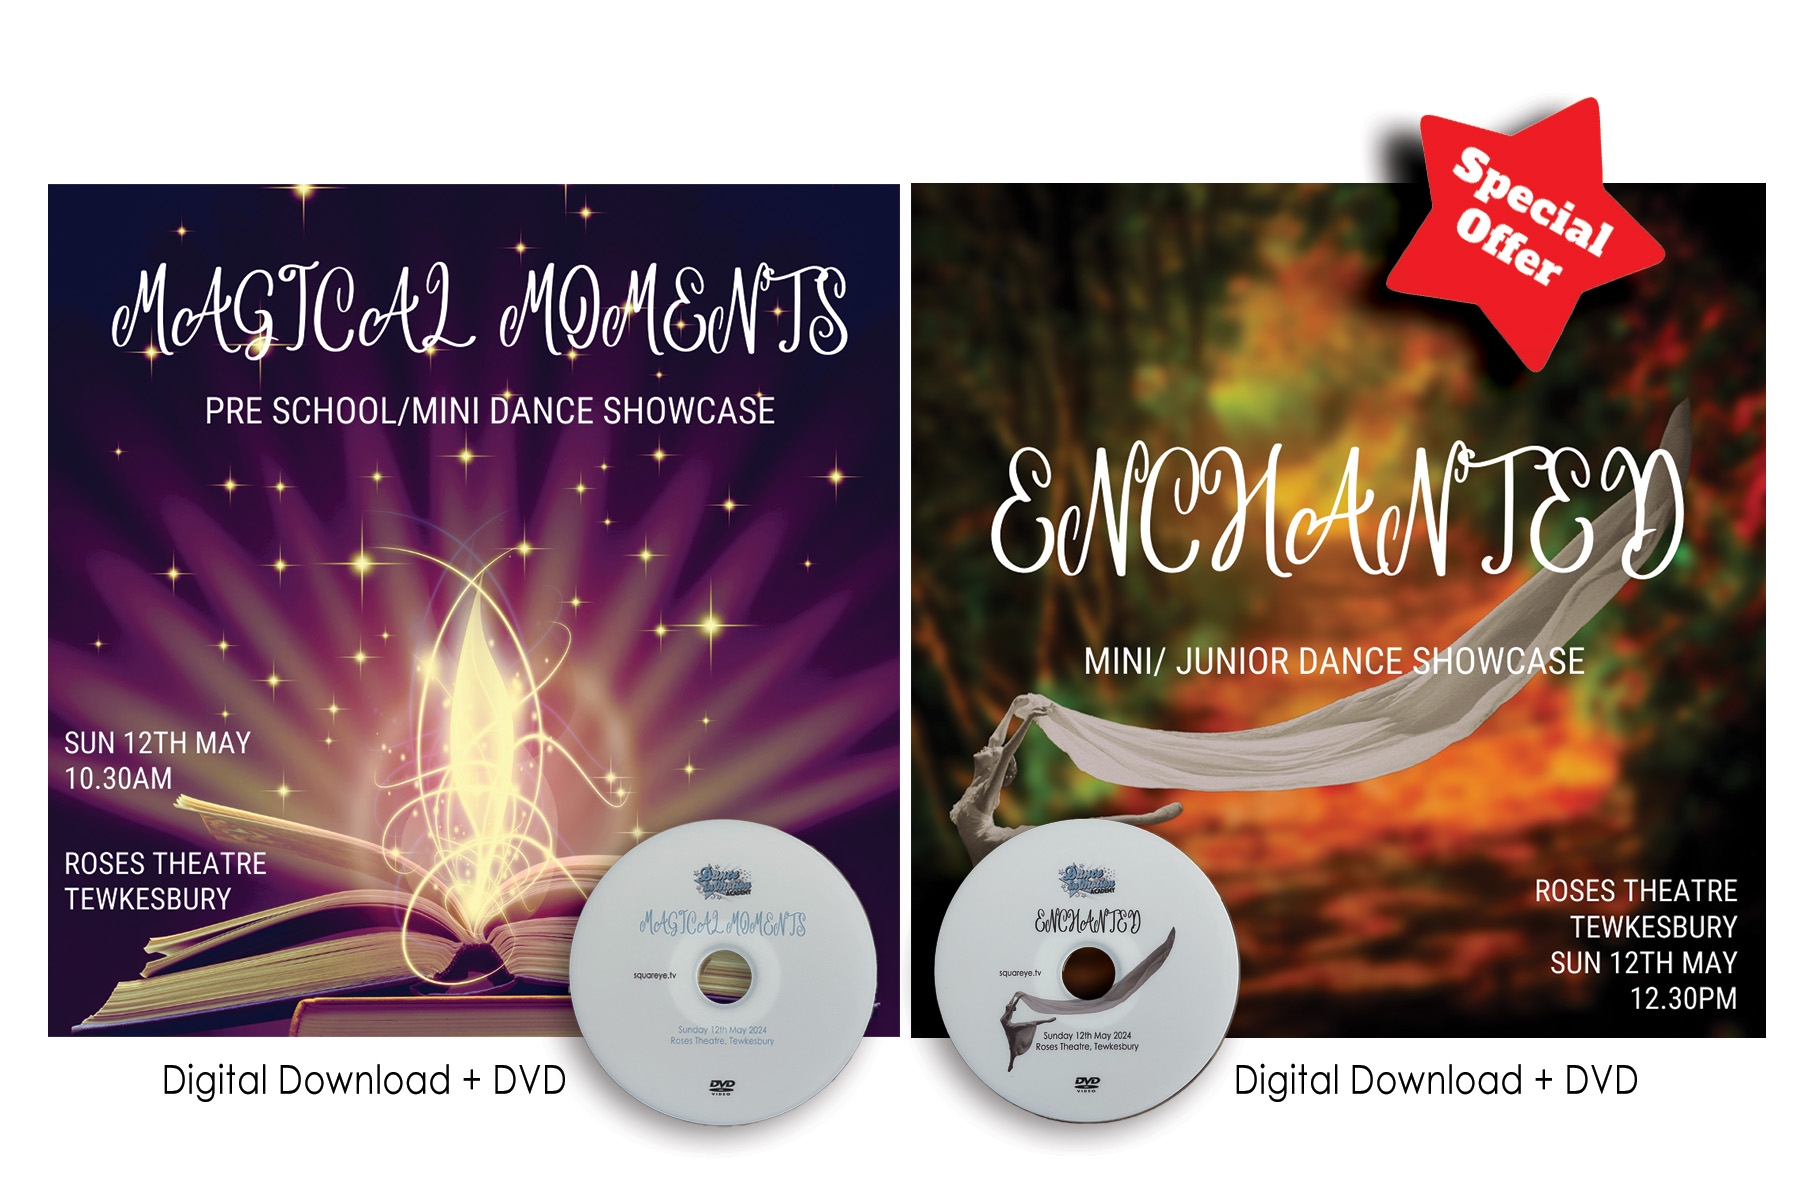 Dance in Motion Academy ‘Enchanted’ & ‘Magical Moments’ – DIGITAL DOWNLOAD + DVD SHOW OFFER